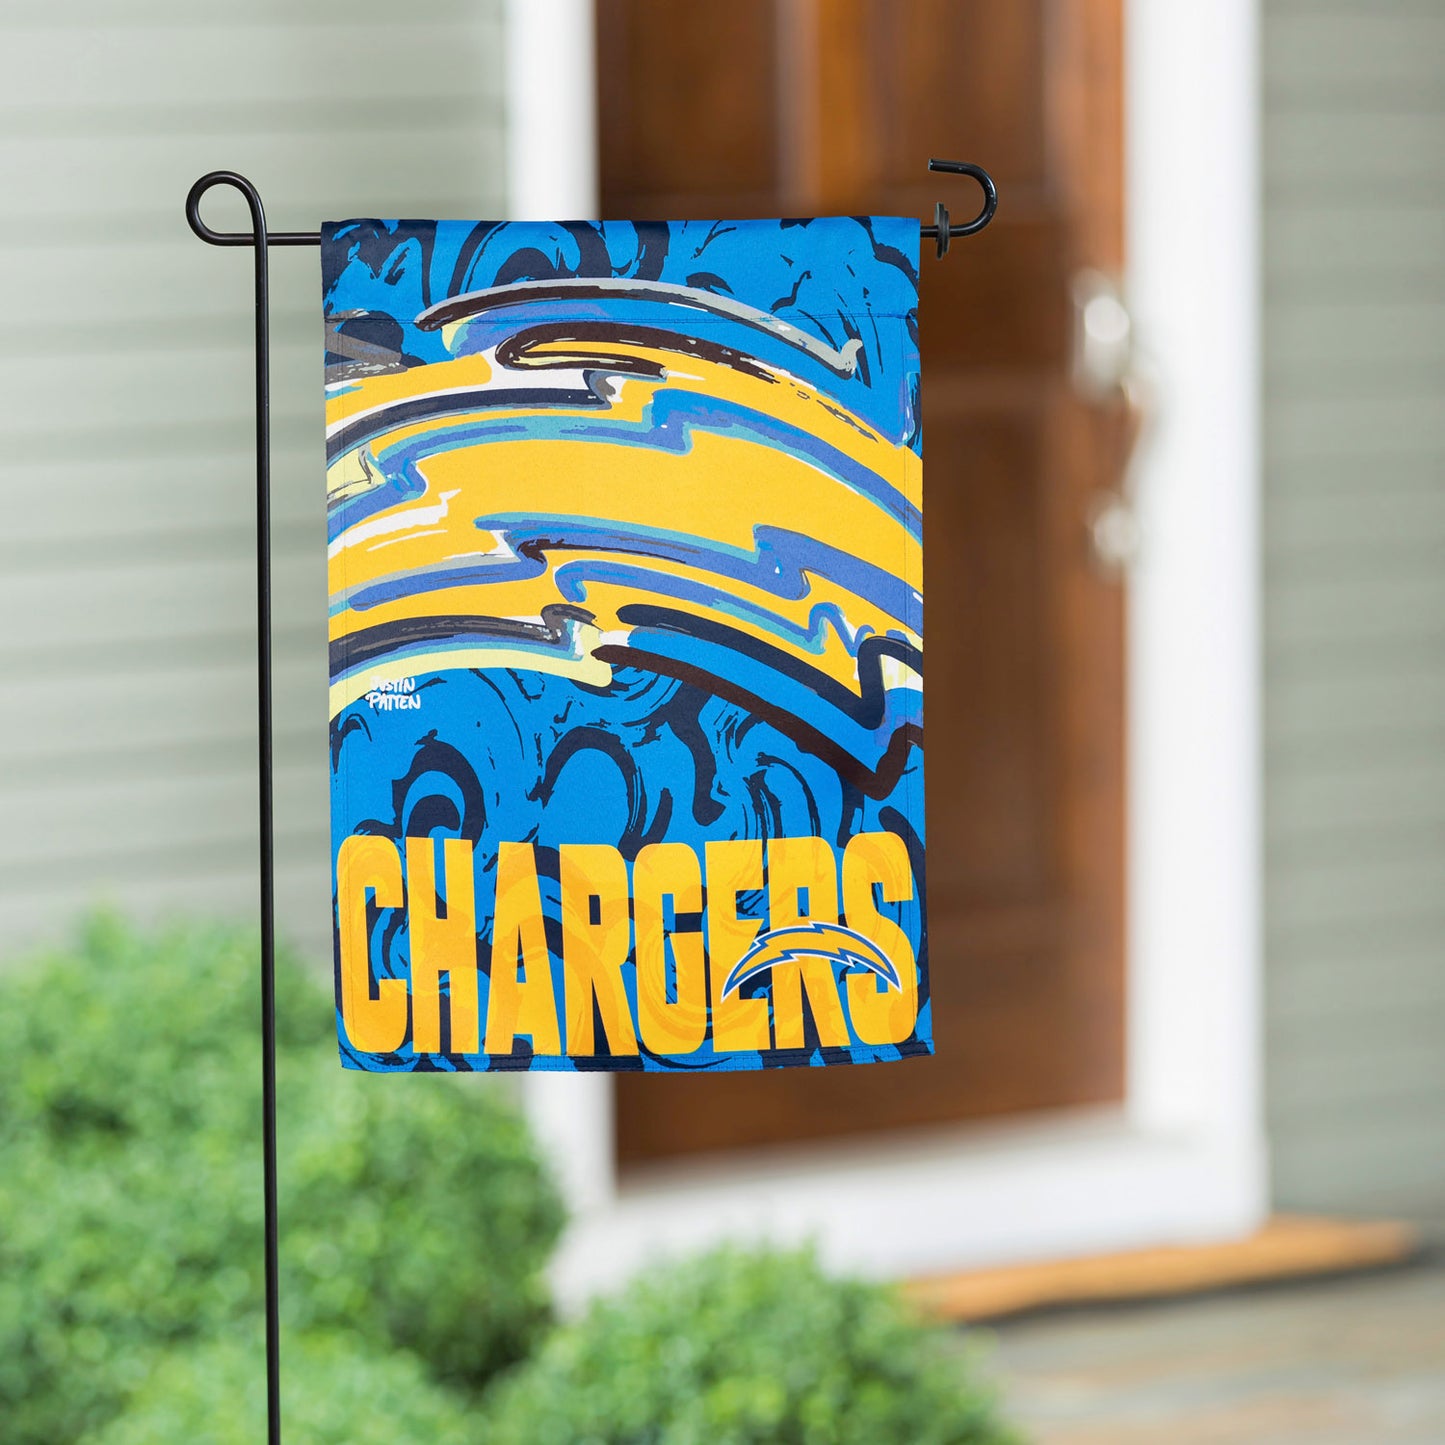 Los Angeles Chargers Garden Flag 12" x 18" by Justin Patten